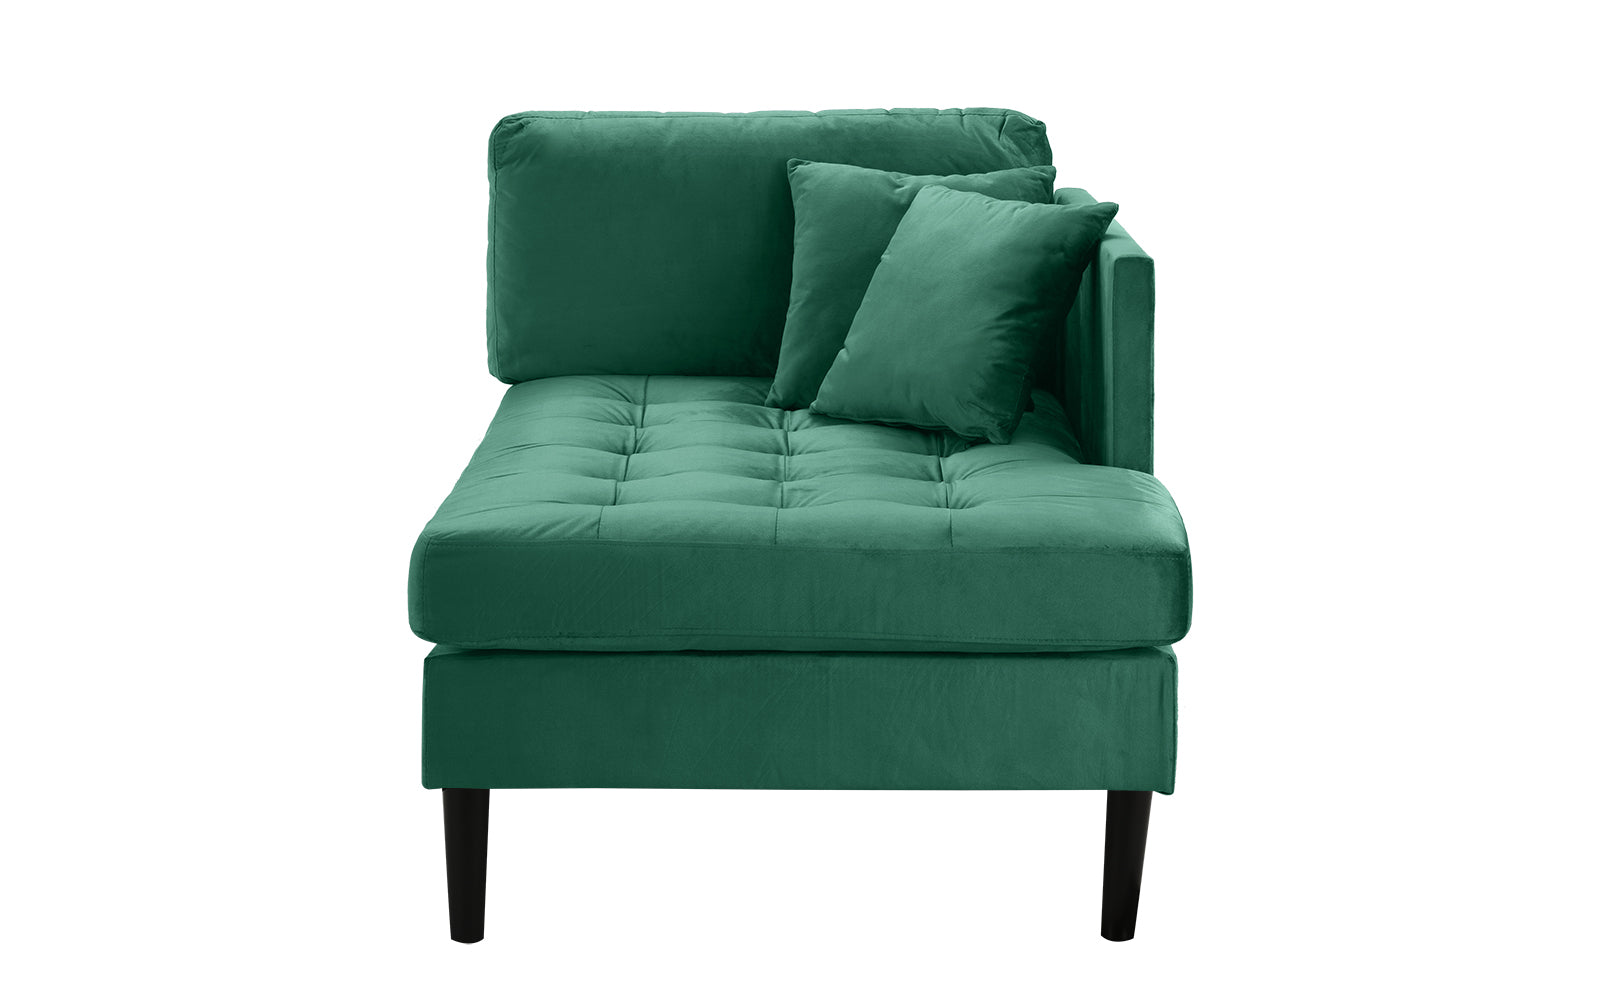 EXP294-CHAISE-GREEN Greta Old Hollywood Velvet Tufted Chaise Lounge sku EXP294-CHAISE-GREEN